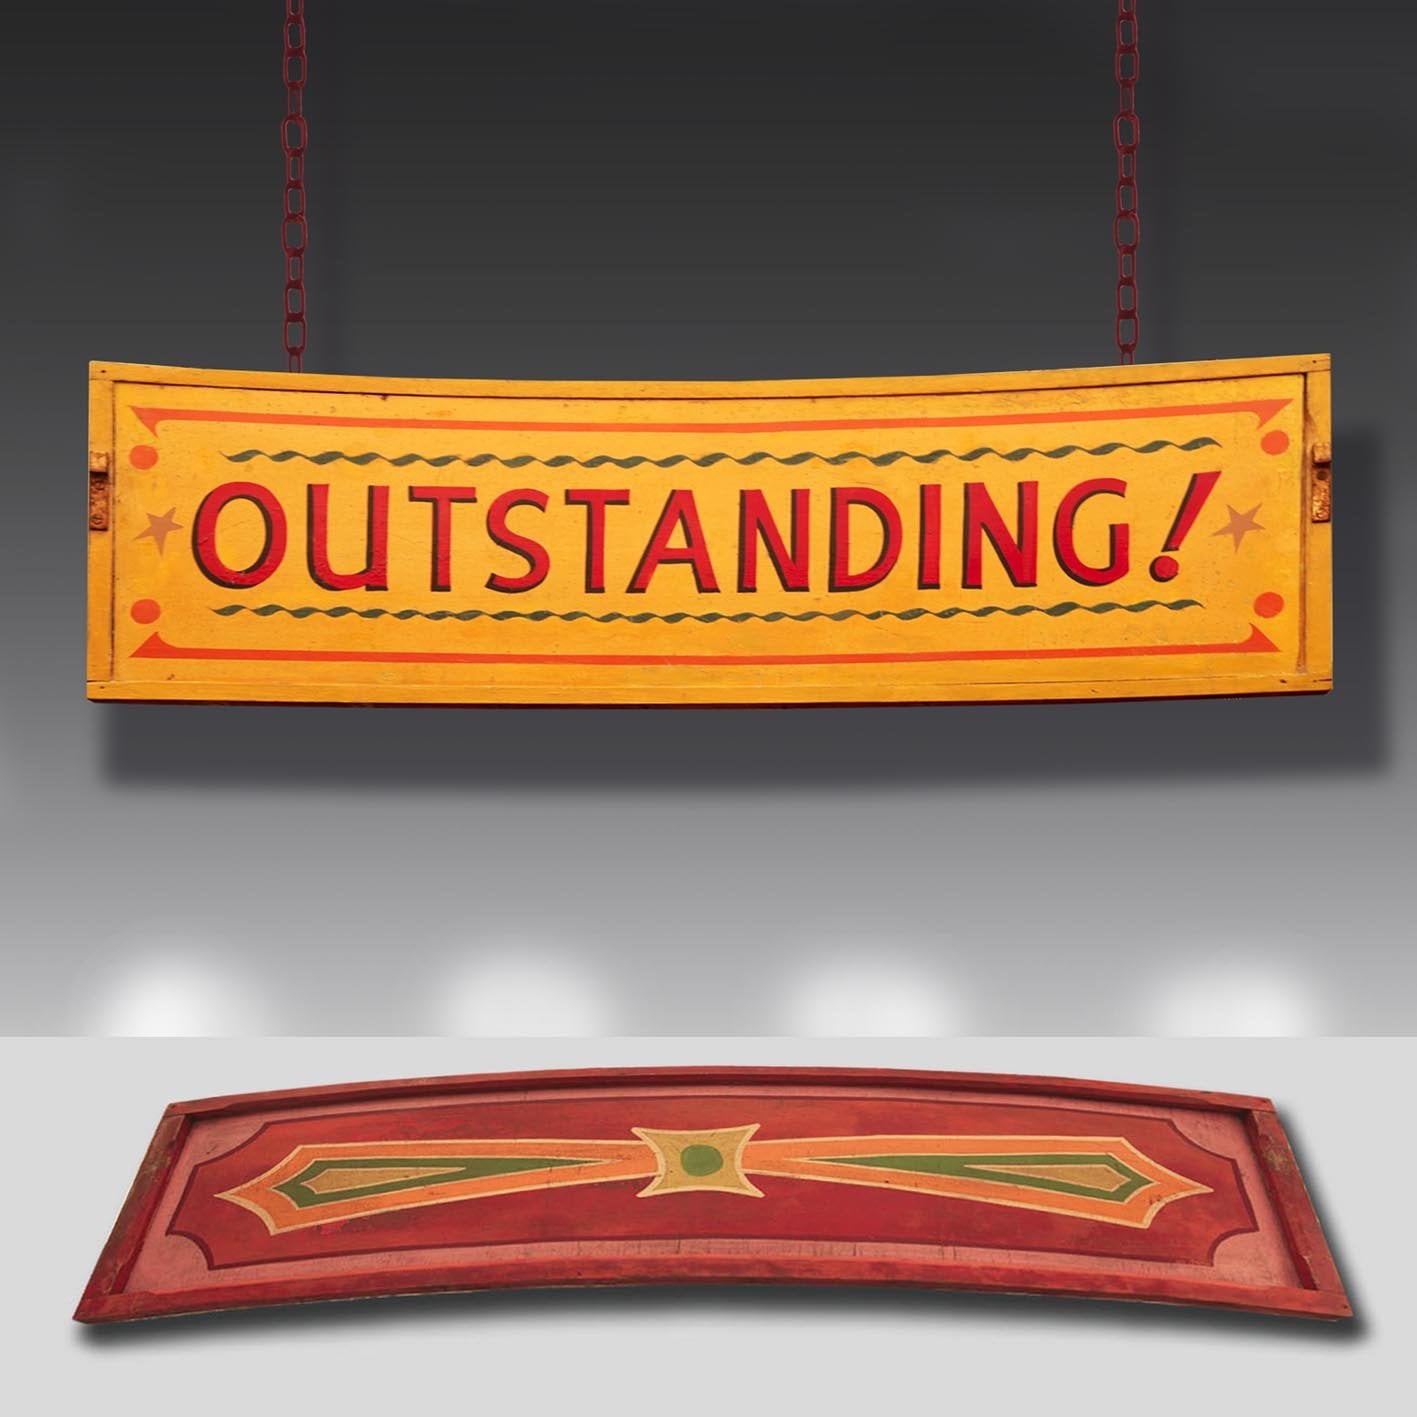 'Outstanding' 1930s Vintage Fairground Sign